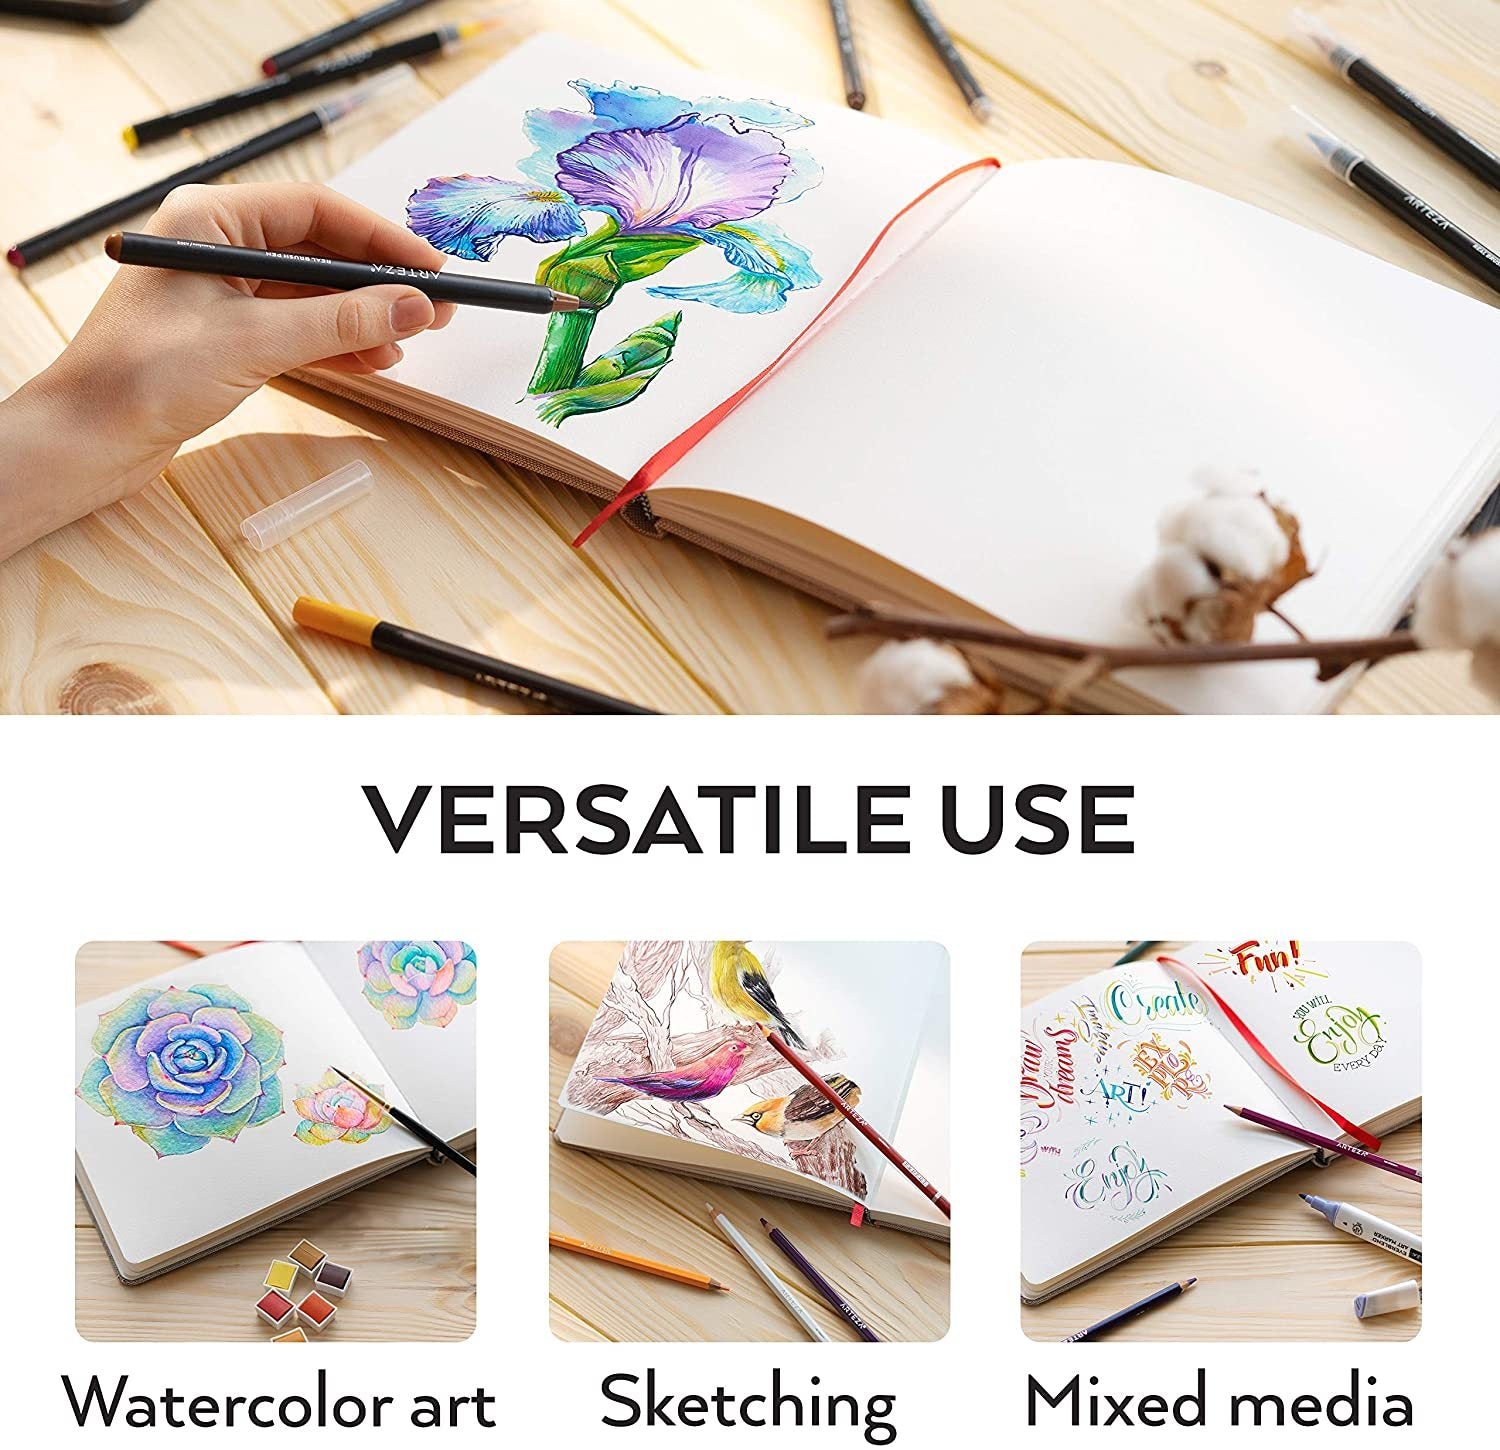 caichuxiye Mini Watercolor Sketchbook Water Color Paper for Artists Organ Design Foldable Academic Painting Book Sketchbooks